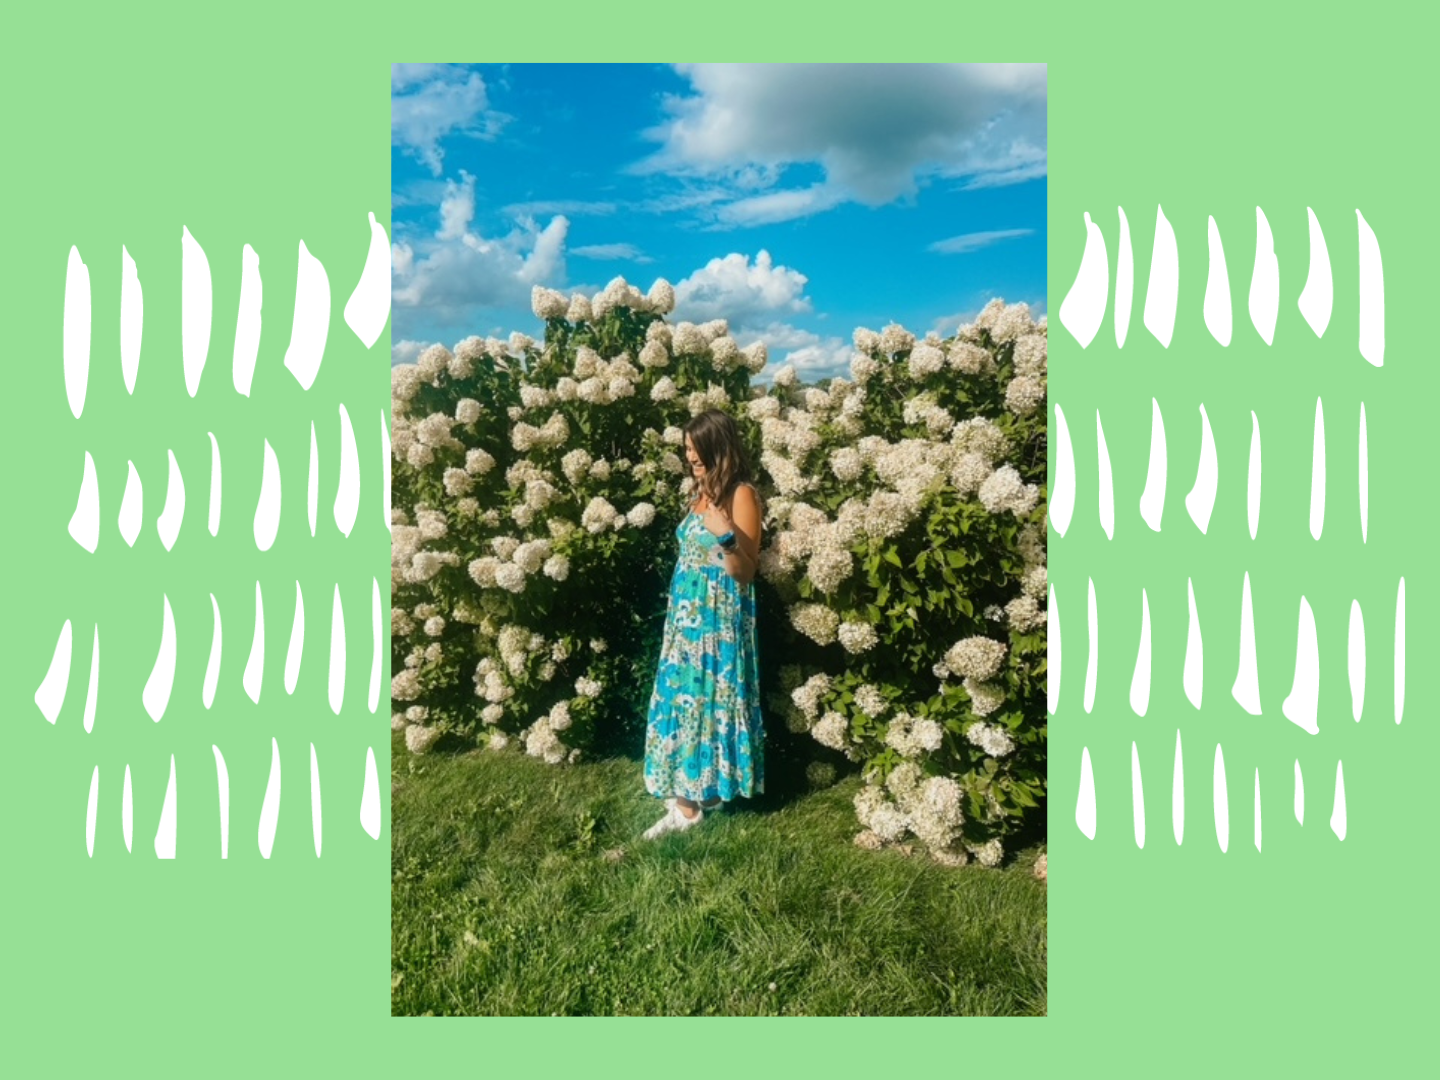 Rebecca poses in a long teal dress, smiling, in front of bushes of flowers.